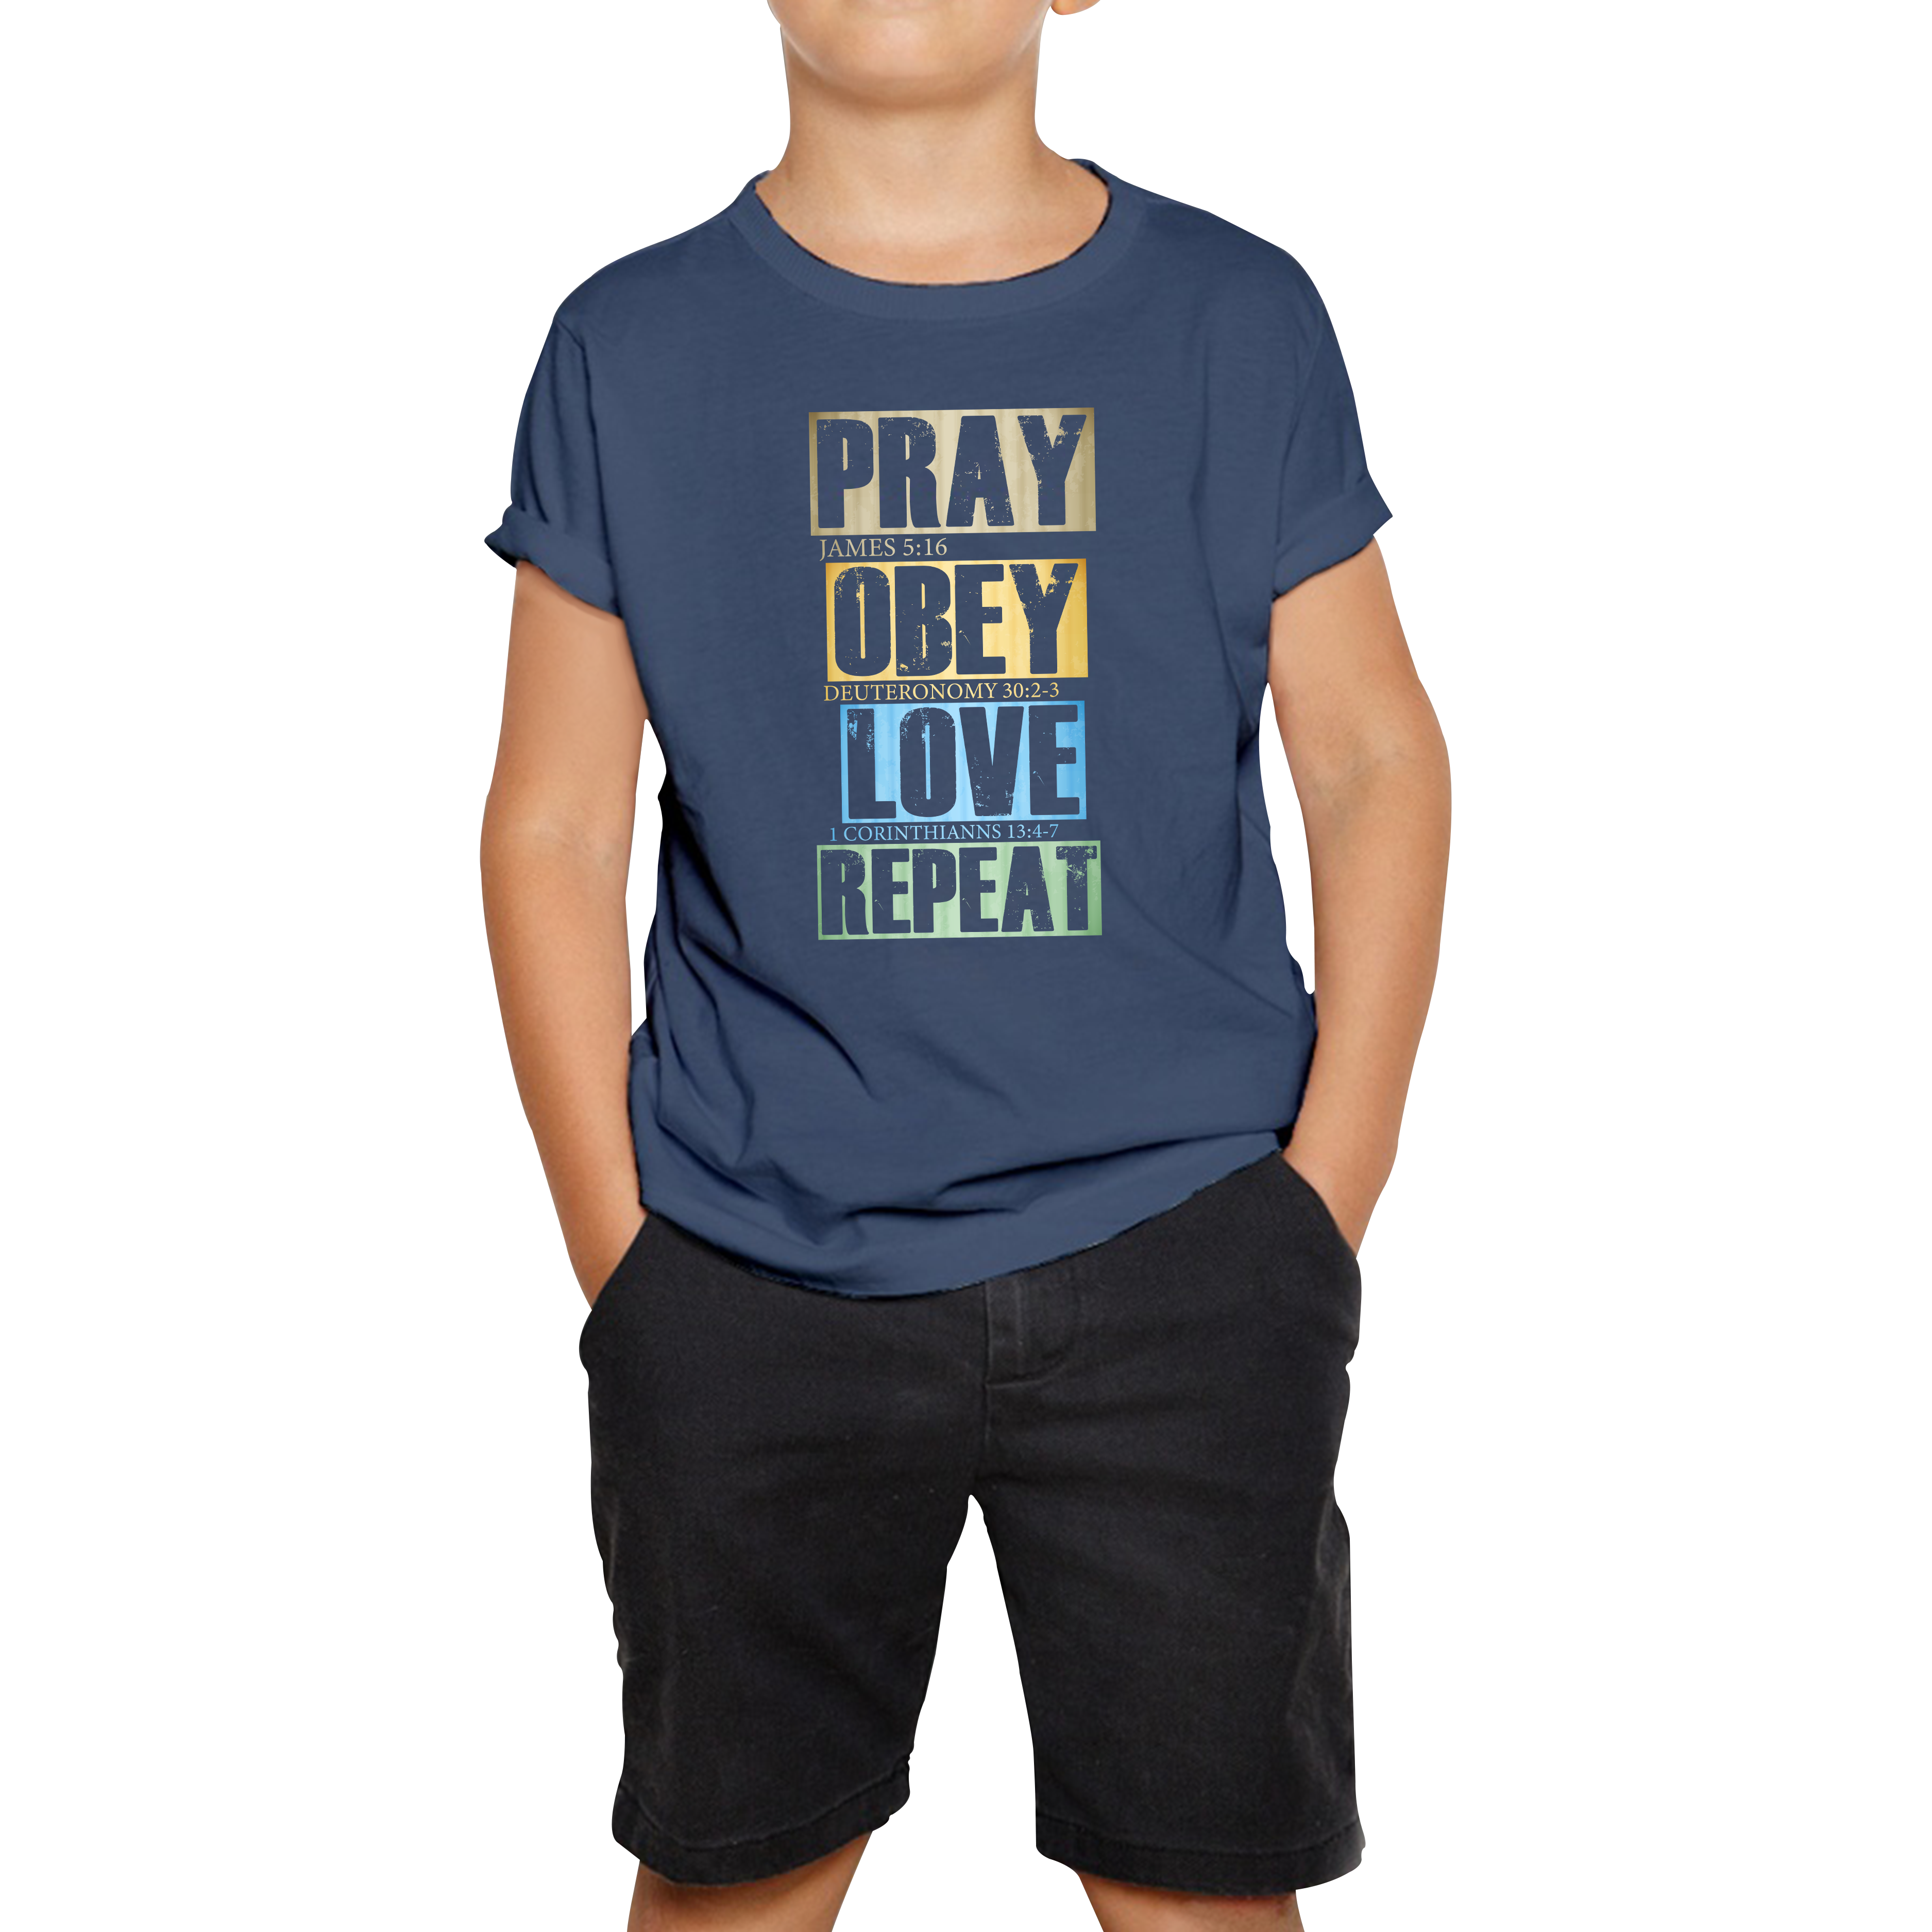 Pray Obey Love Repeat Vintage Christian Bible Christianity Kids Tee